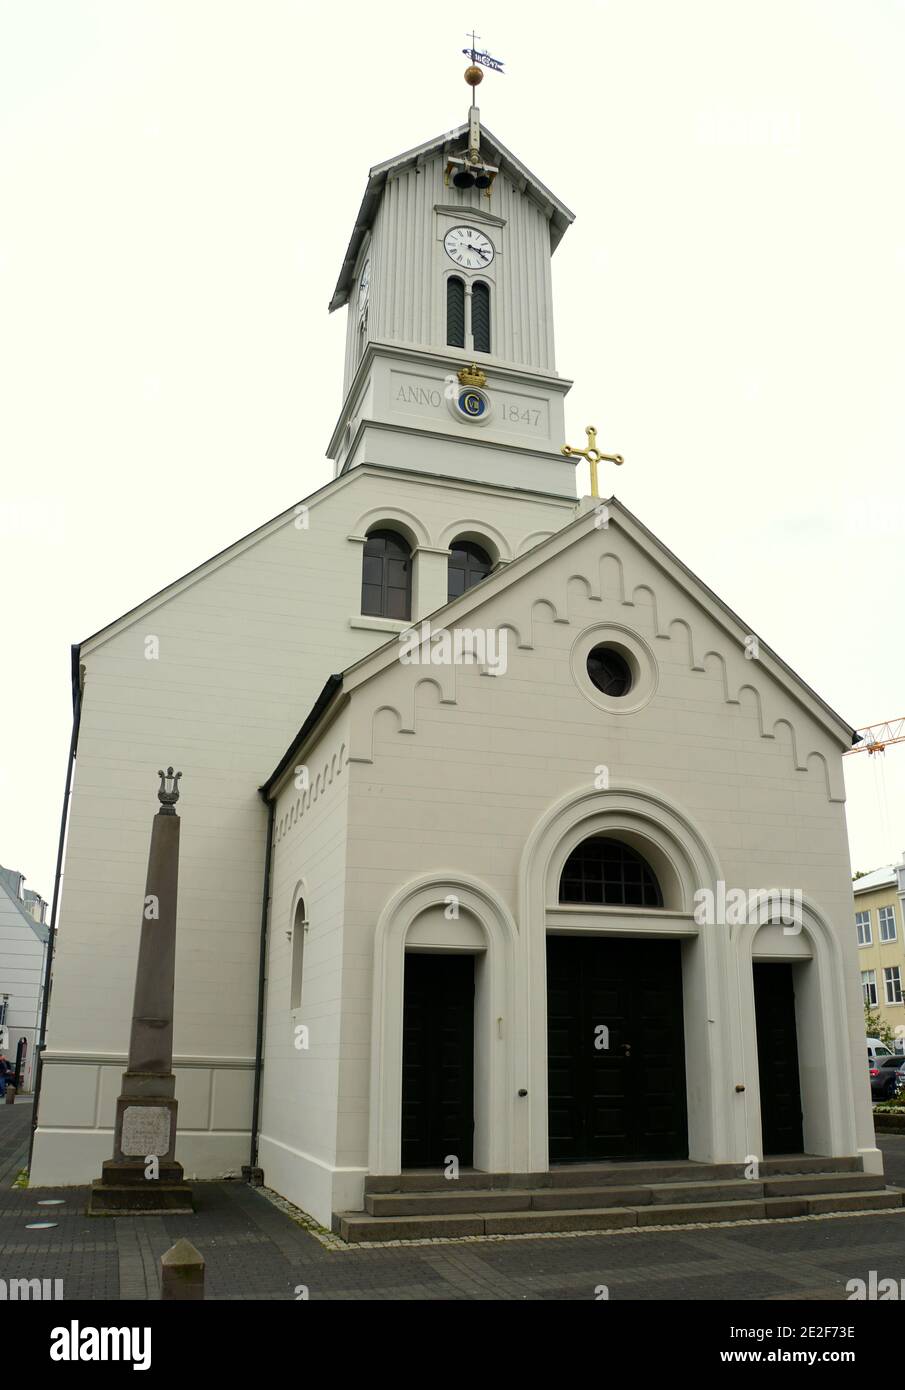 Reykjavik, Iceland - June 20, 2019 - The view of Domkirkja, the oldest church in the city Stock Photo